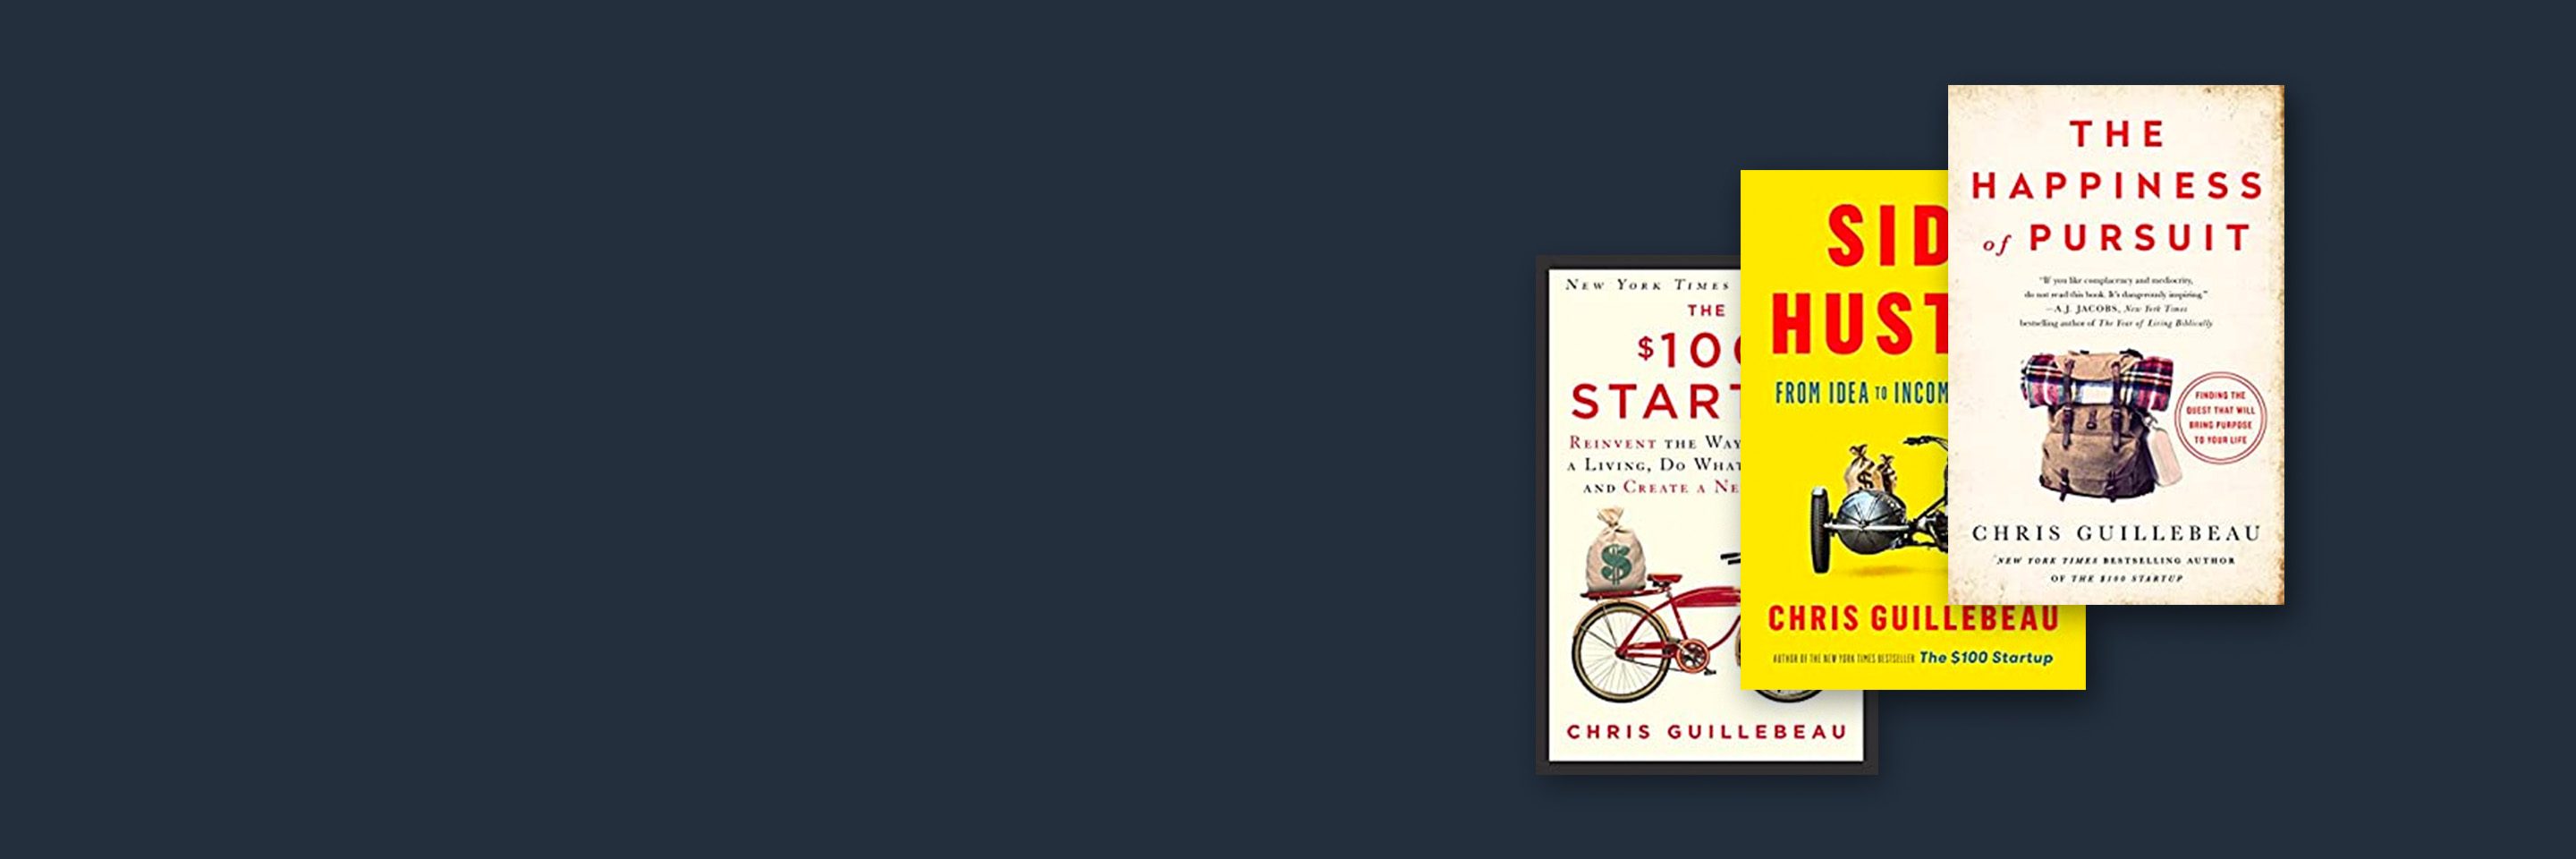 Entrepreneur Stories: Chris Guillebeau, Best-selling Author of The $100 StartUp